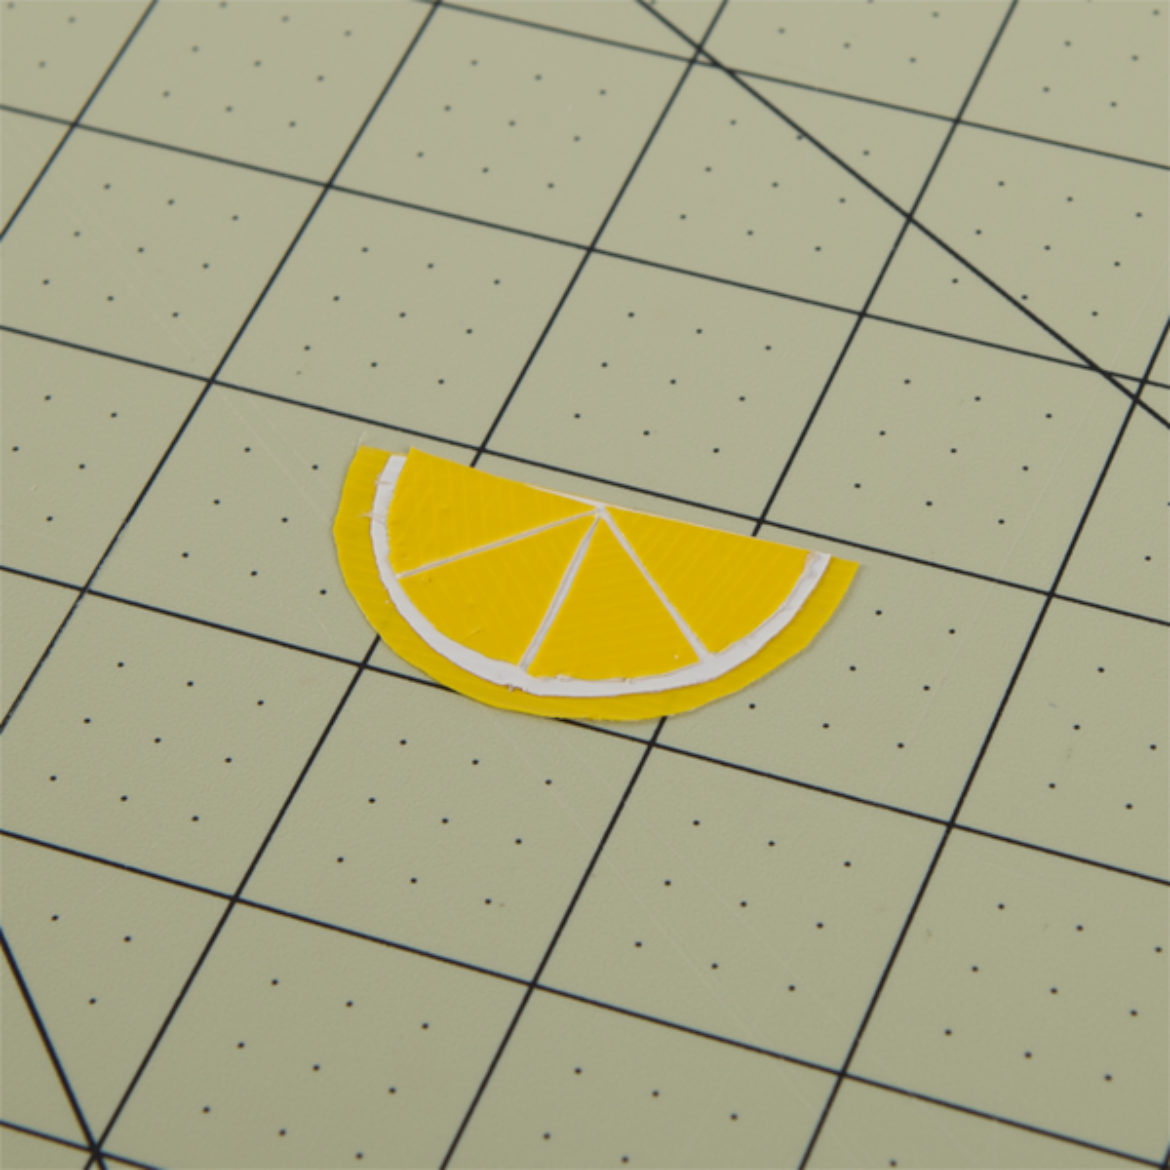 Steps 5-6 repeated until there are 4 equal segments in your lemon wedge